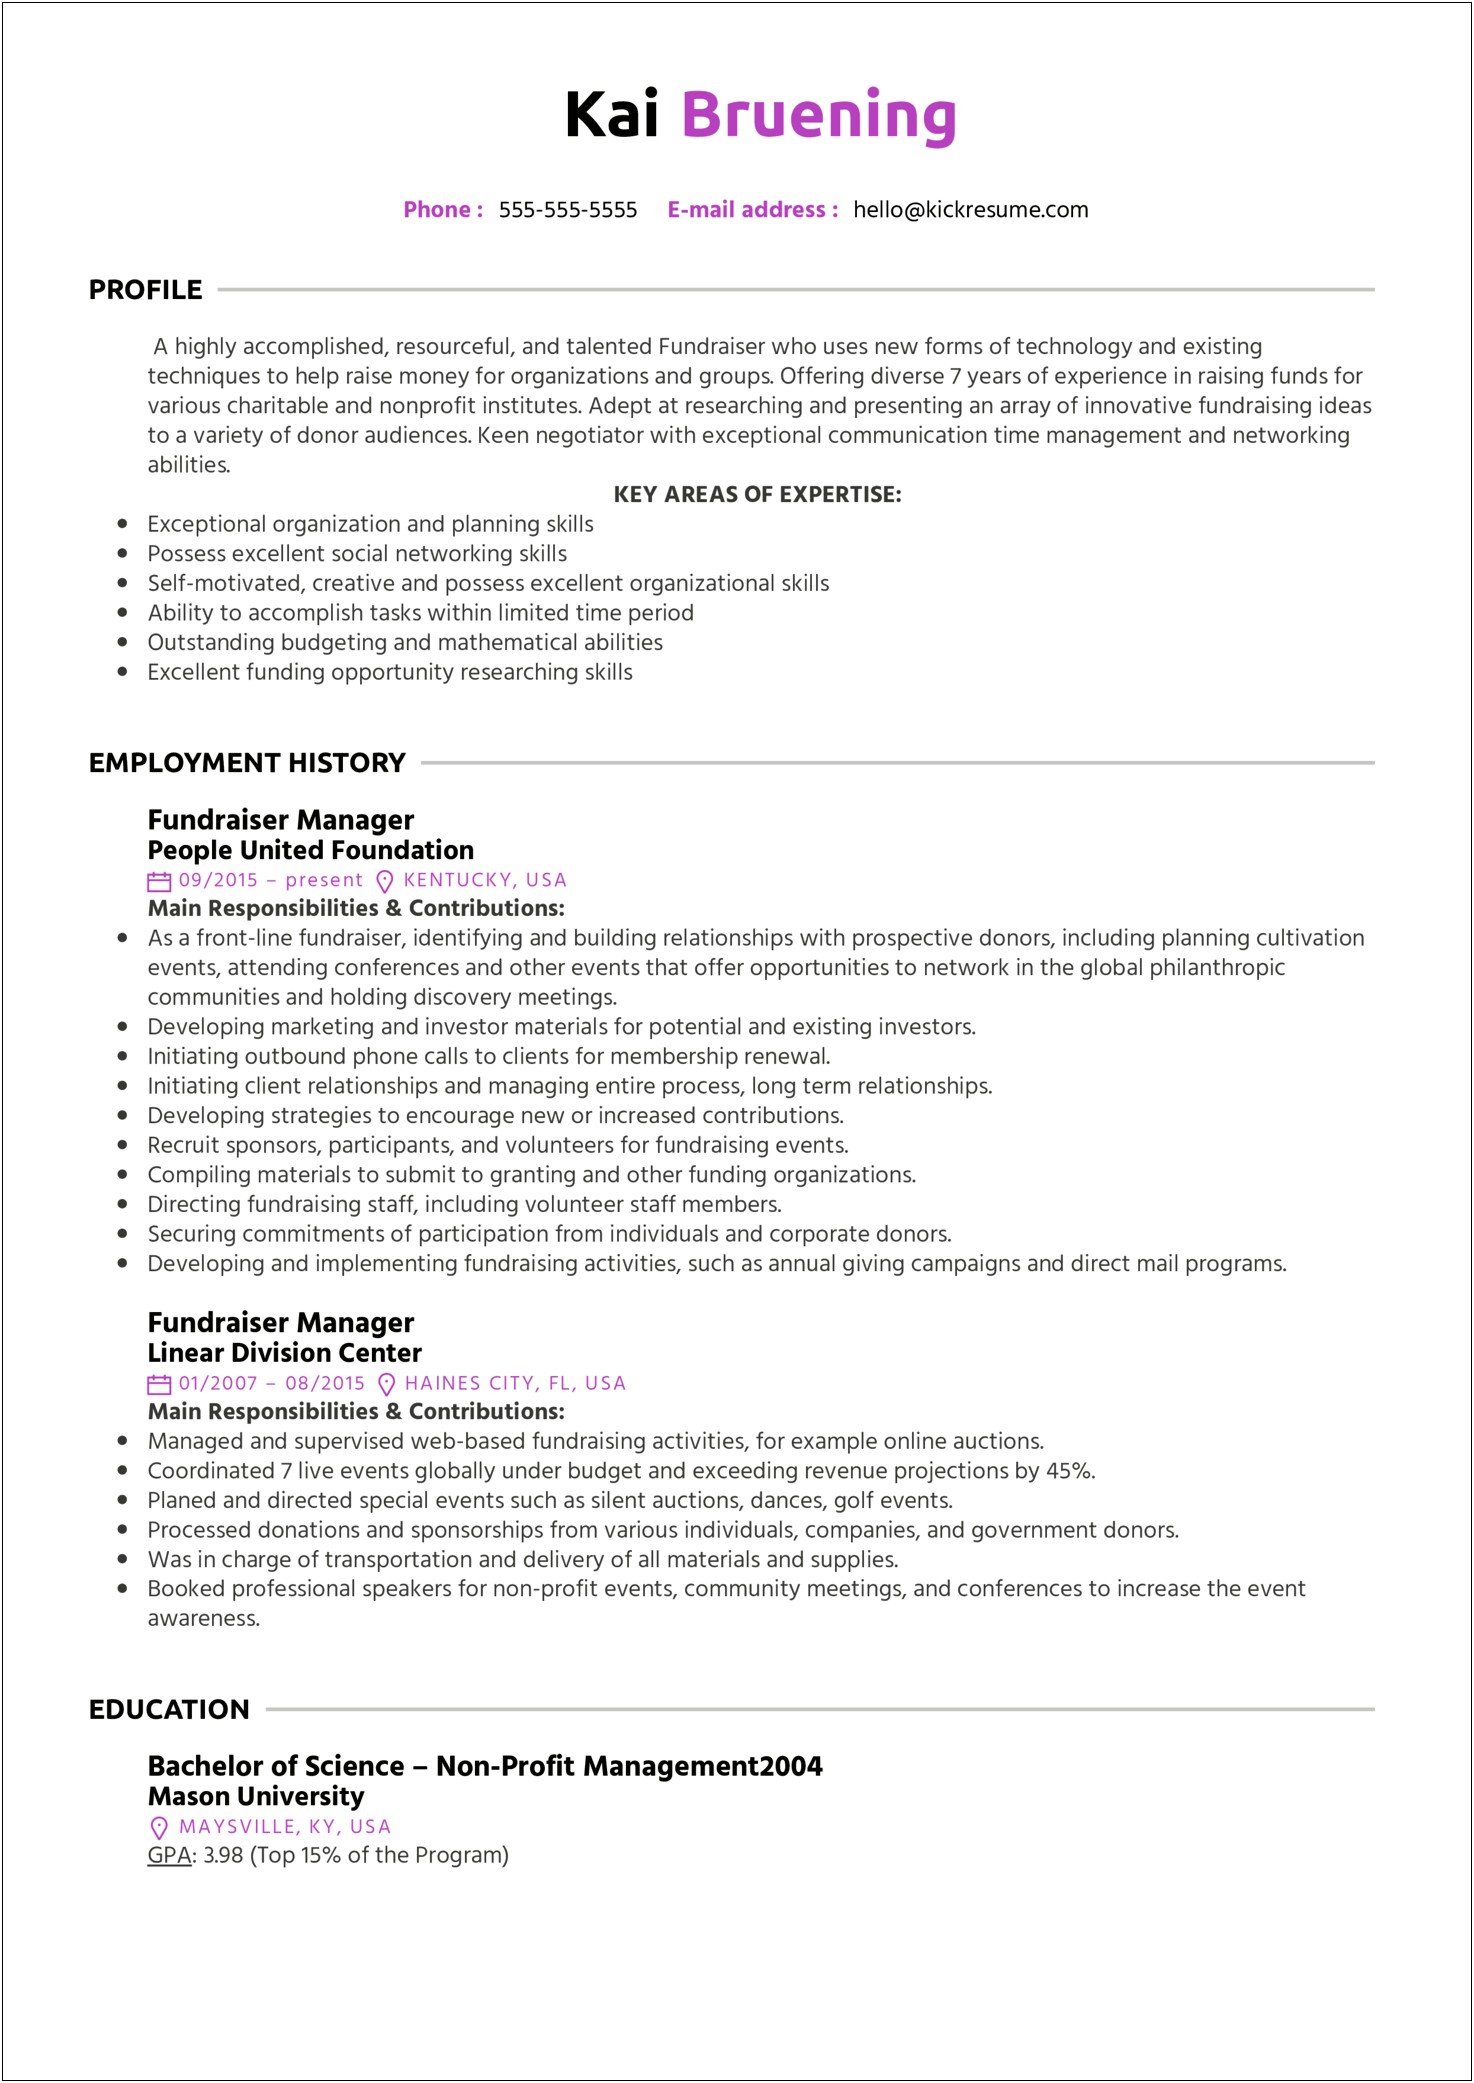 Examples Of Great Resumes For Nonprofit Jobs